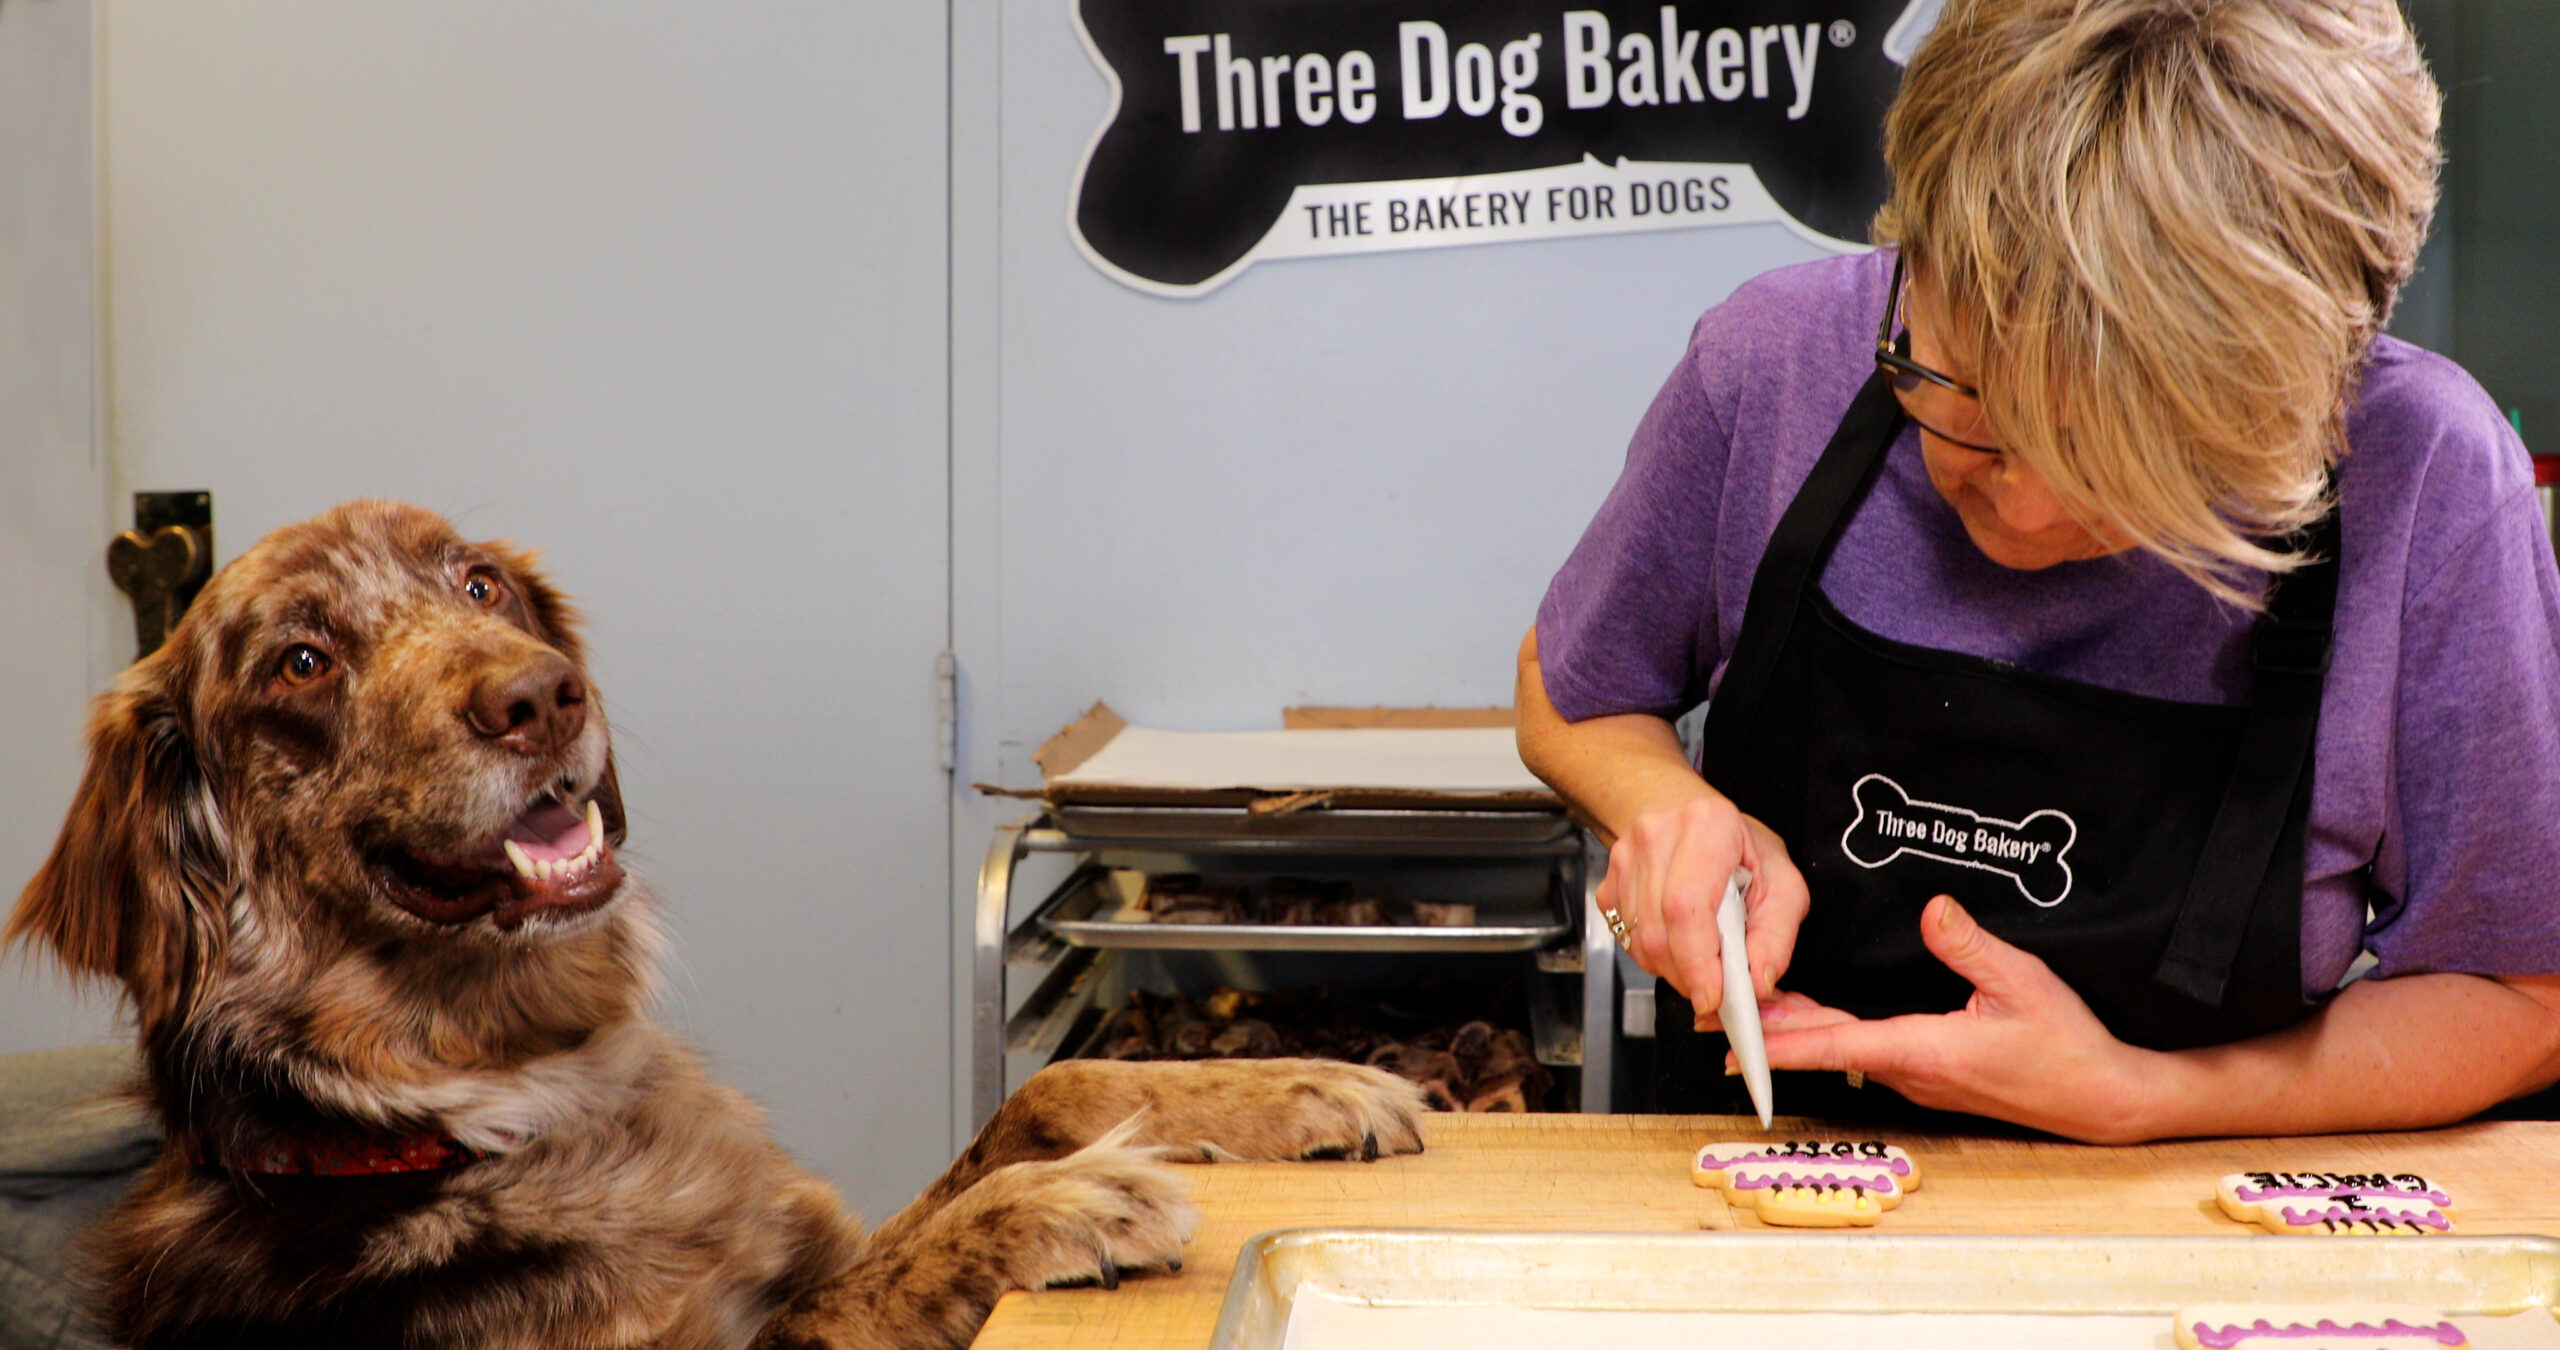 Three Dog Bakery - The Bakery for Dogs